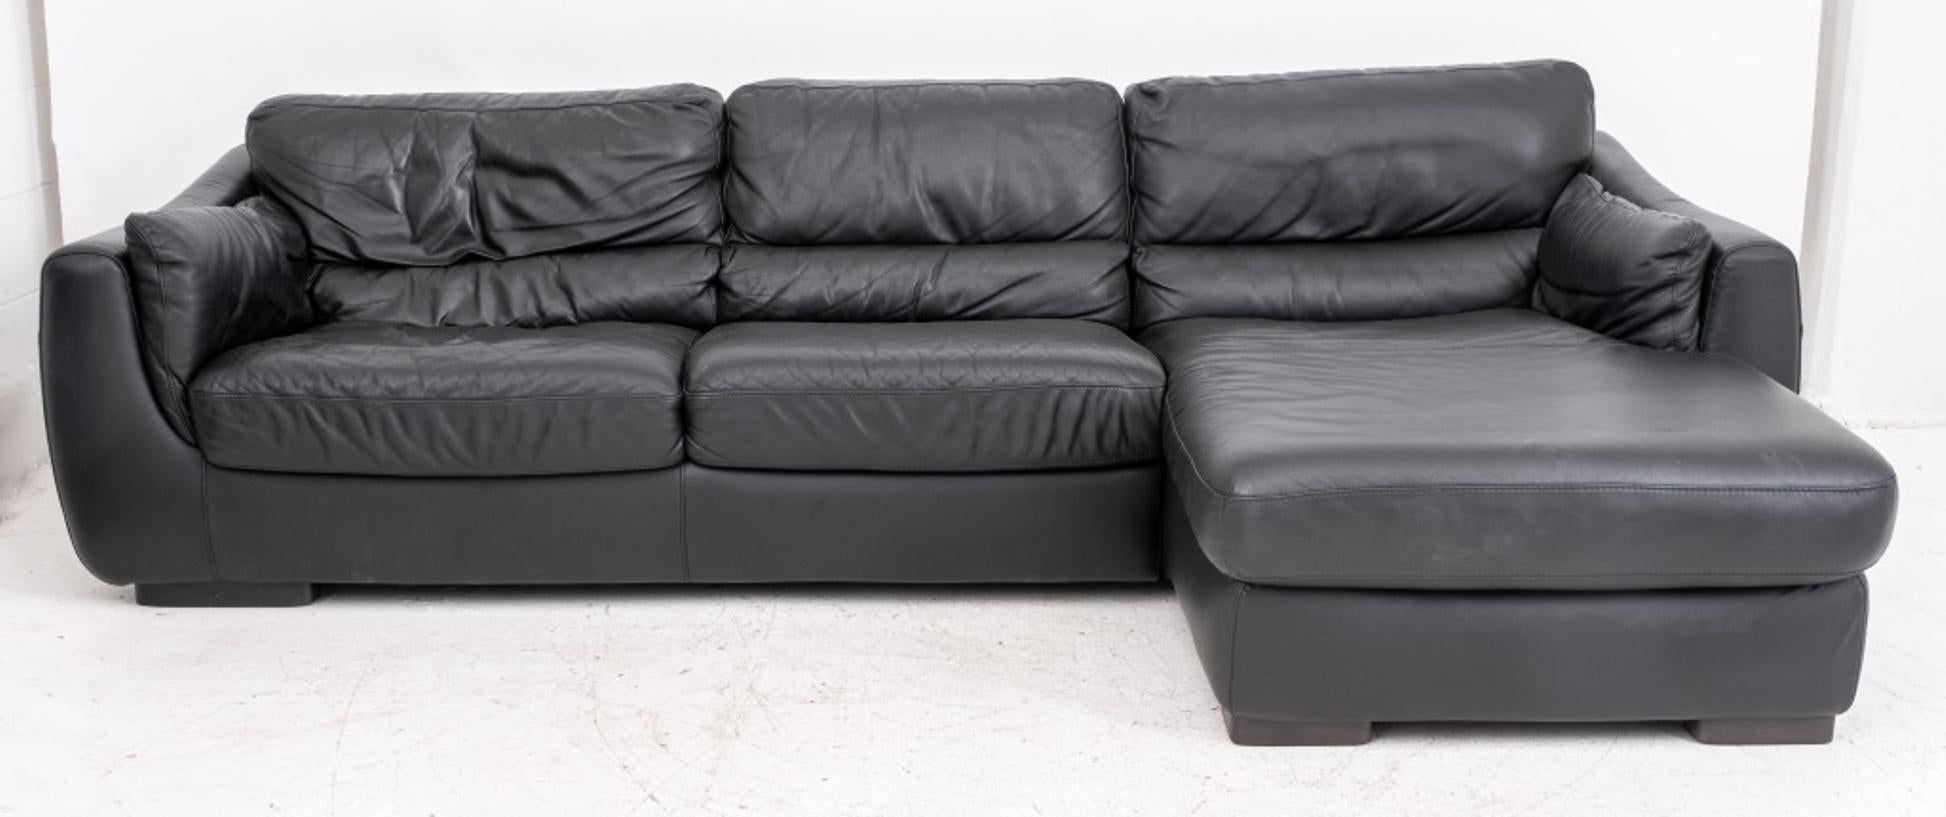 Italian Natuzzi black leather sectional sofa or couch, 